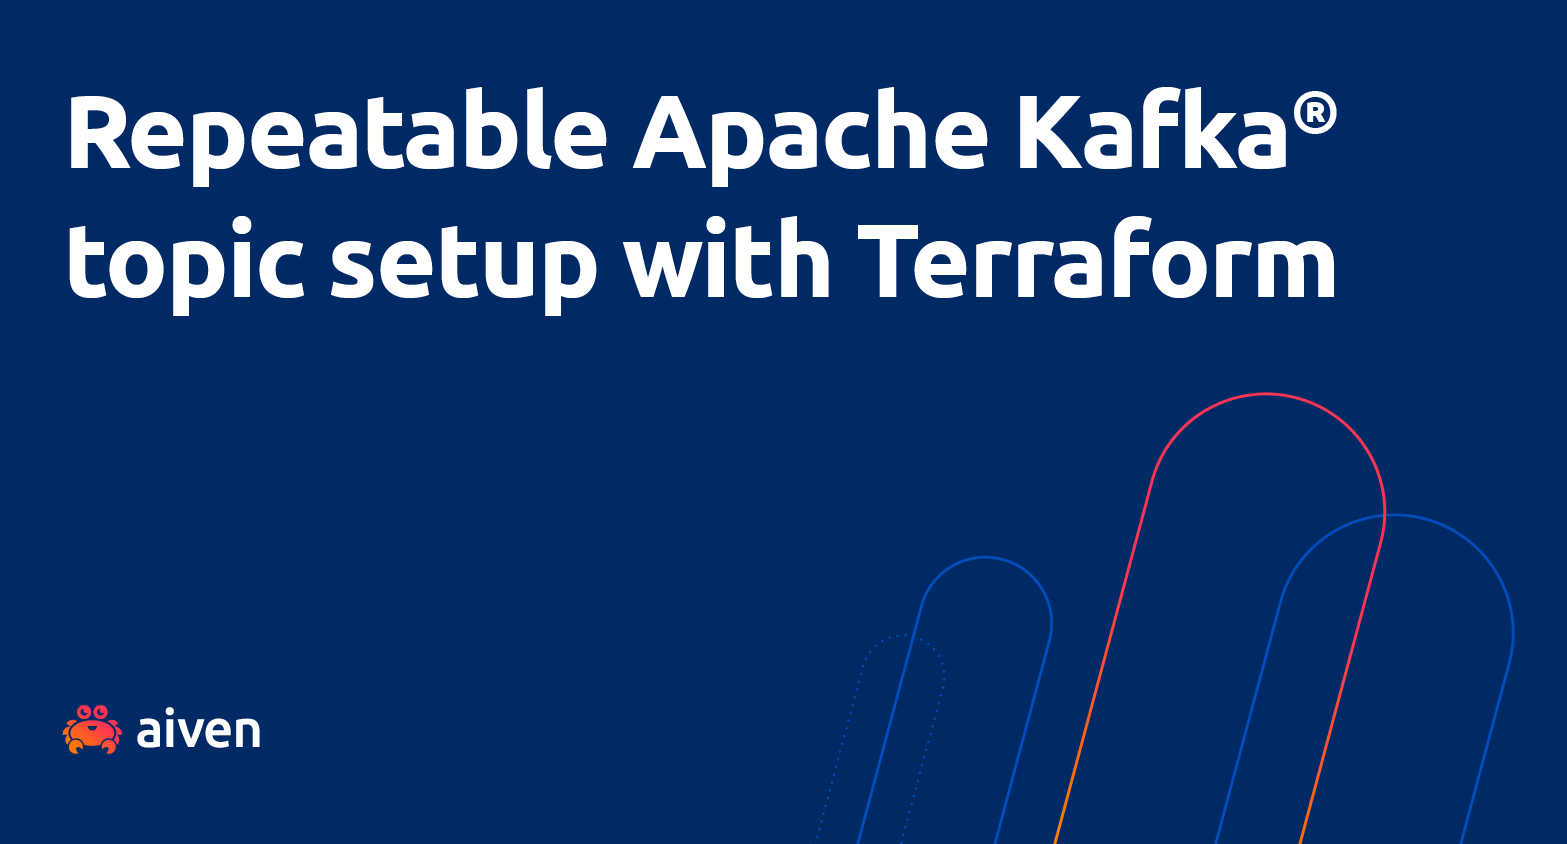 A blue background with the text "Repeatable Apache Kafka® topic setup with Terraform", and the Aiven logo in the corner